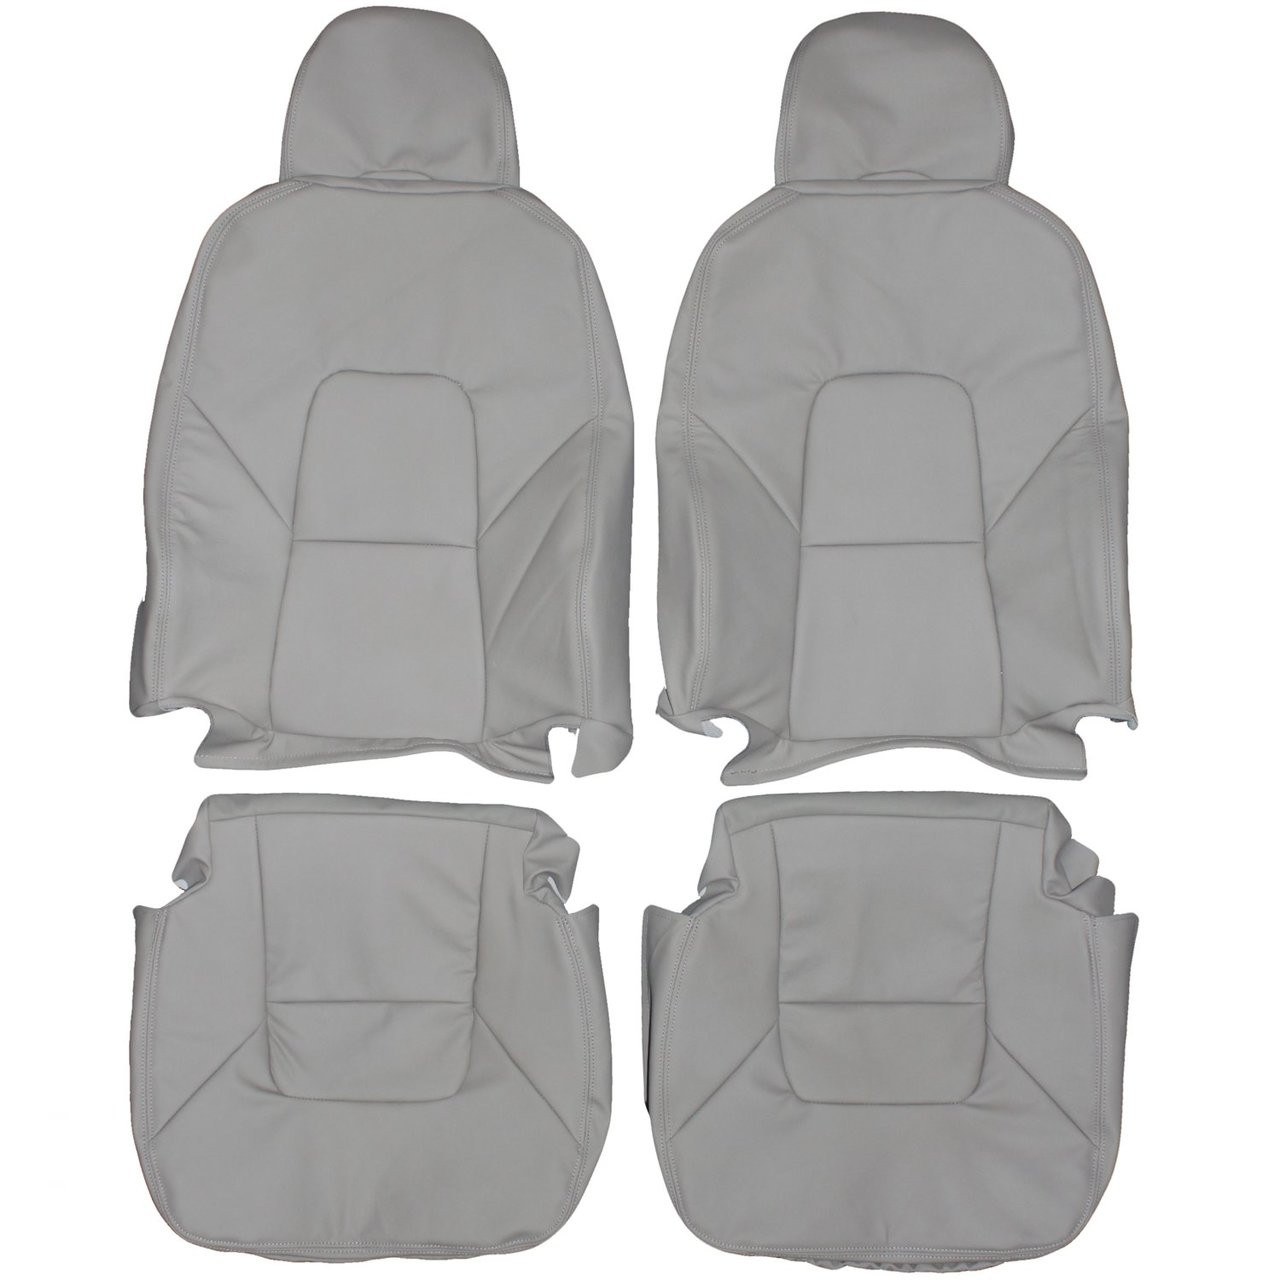 1998-2006 Volvo S80 Custom Real Leather Seat Covers (Front) - Lseat.com